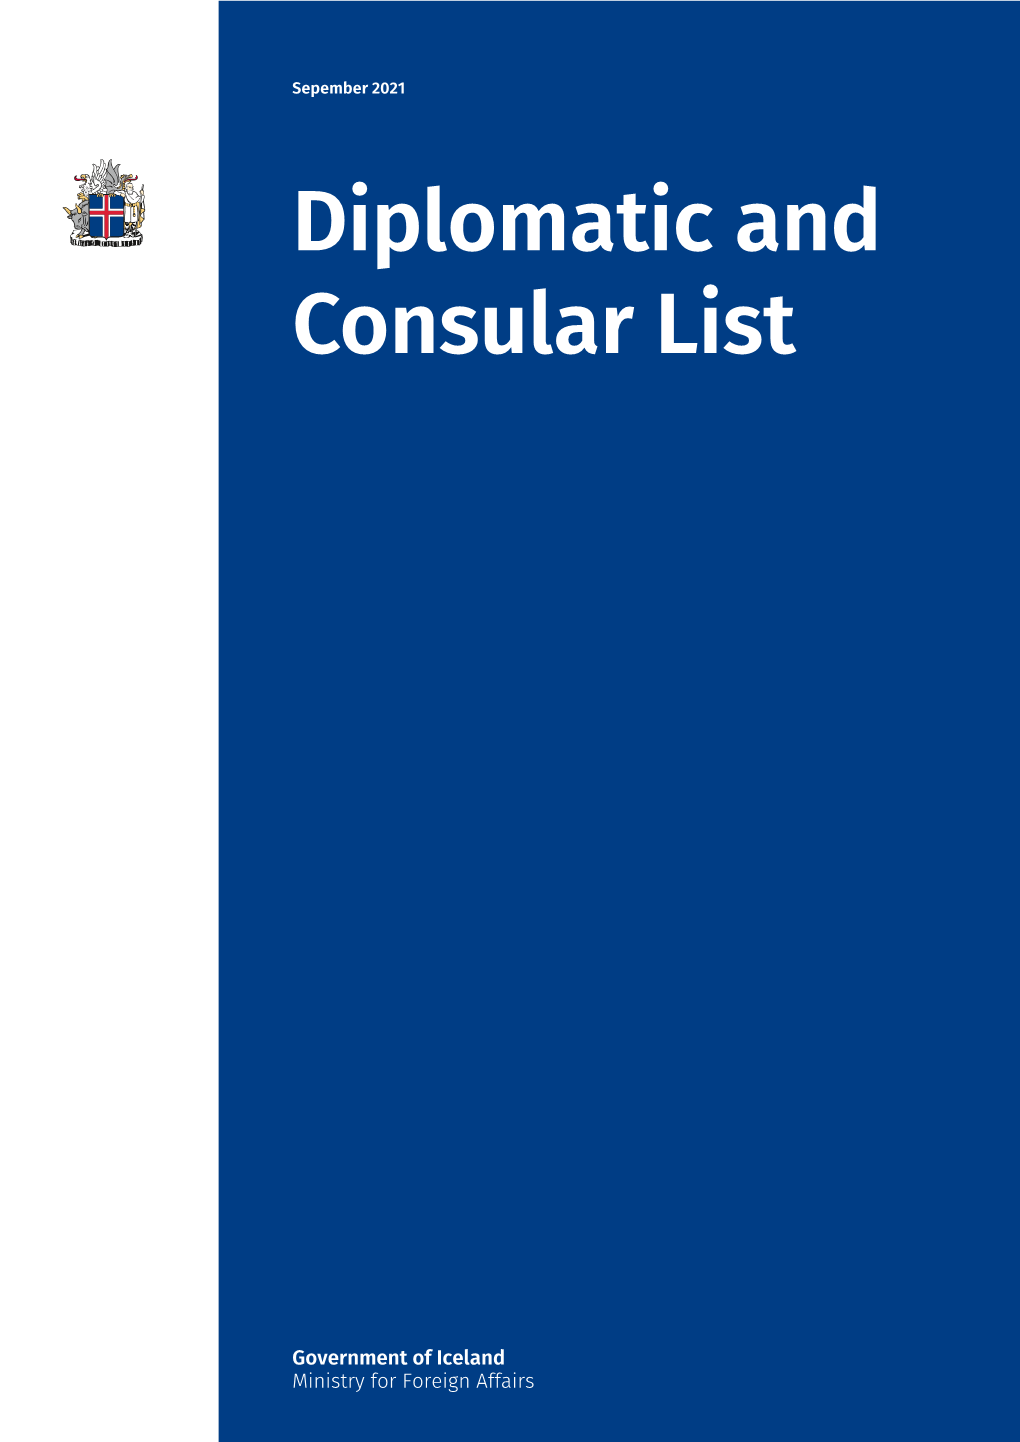 Diplomatic and Consular List (Pdf)